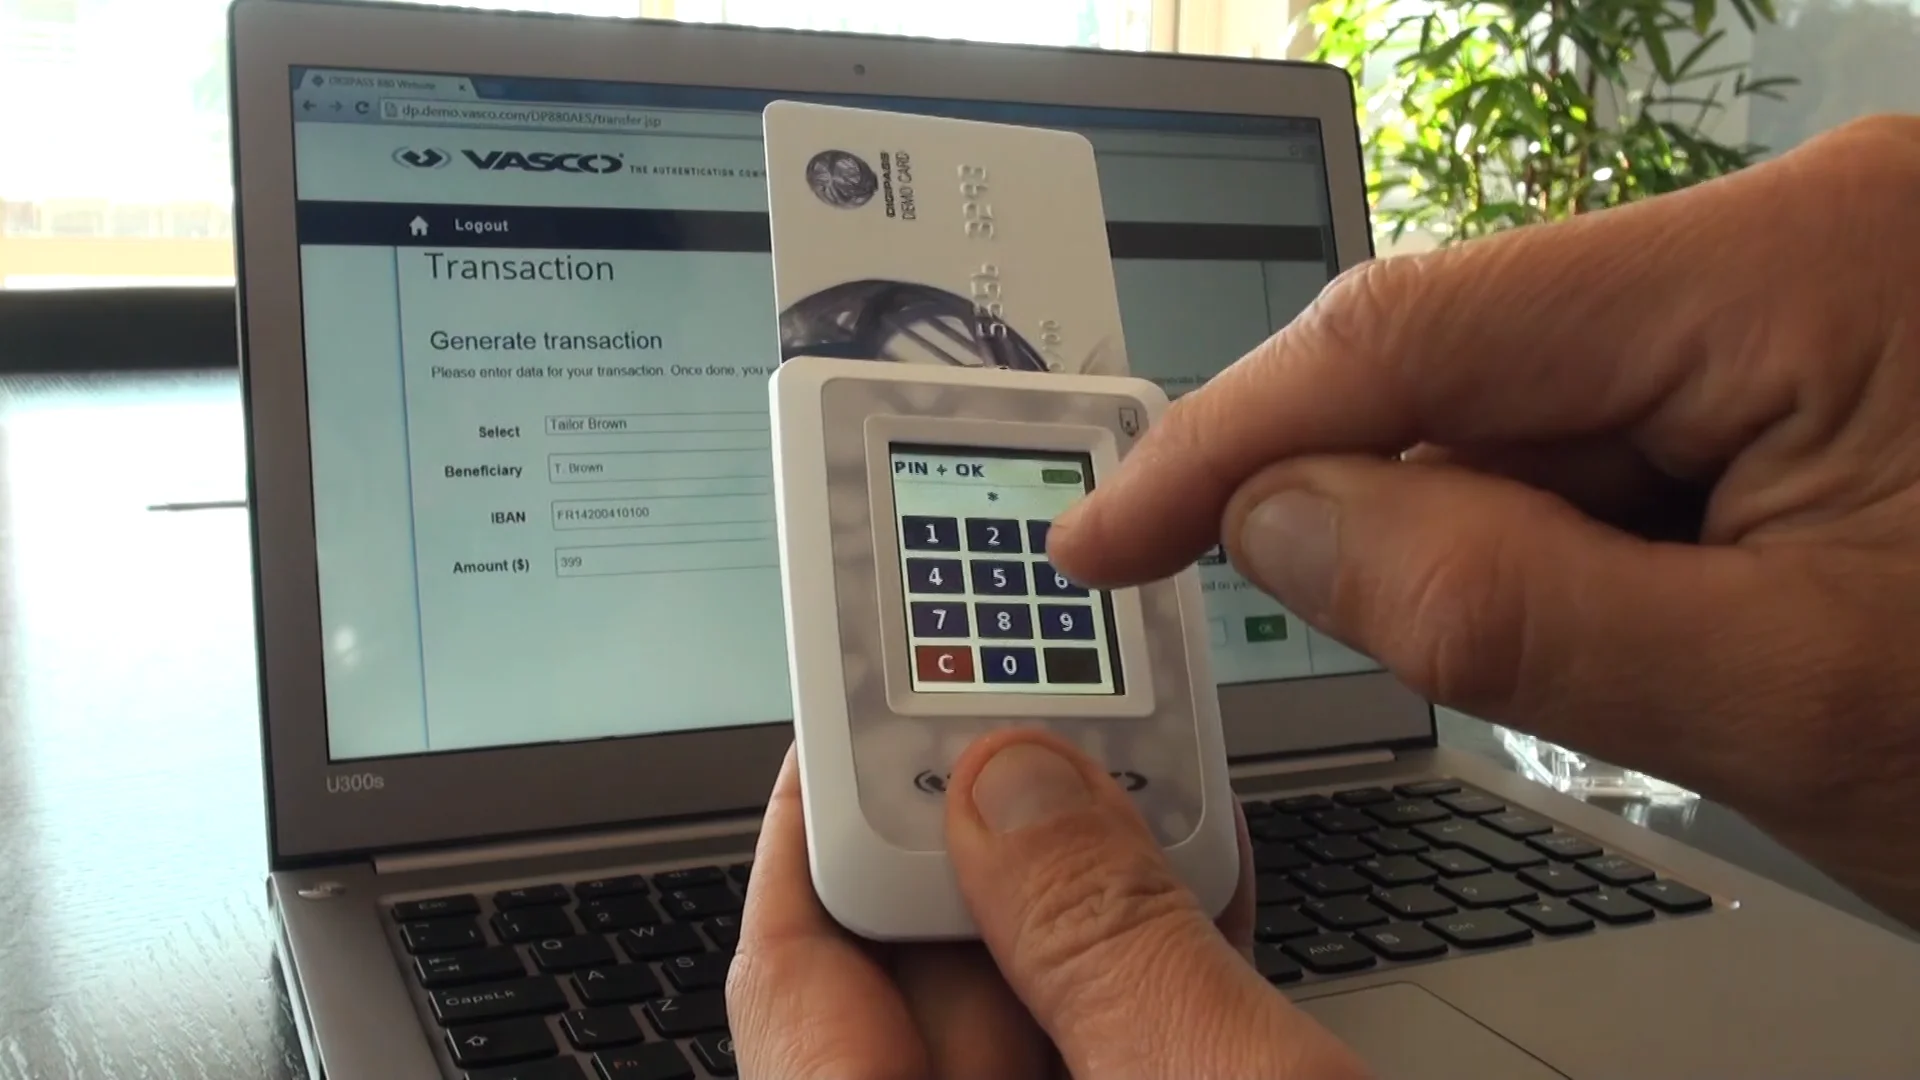 Vasxx Videos - Scan and sign transactions with the DIGIPASS 880 cardreader on Vimeo